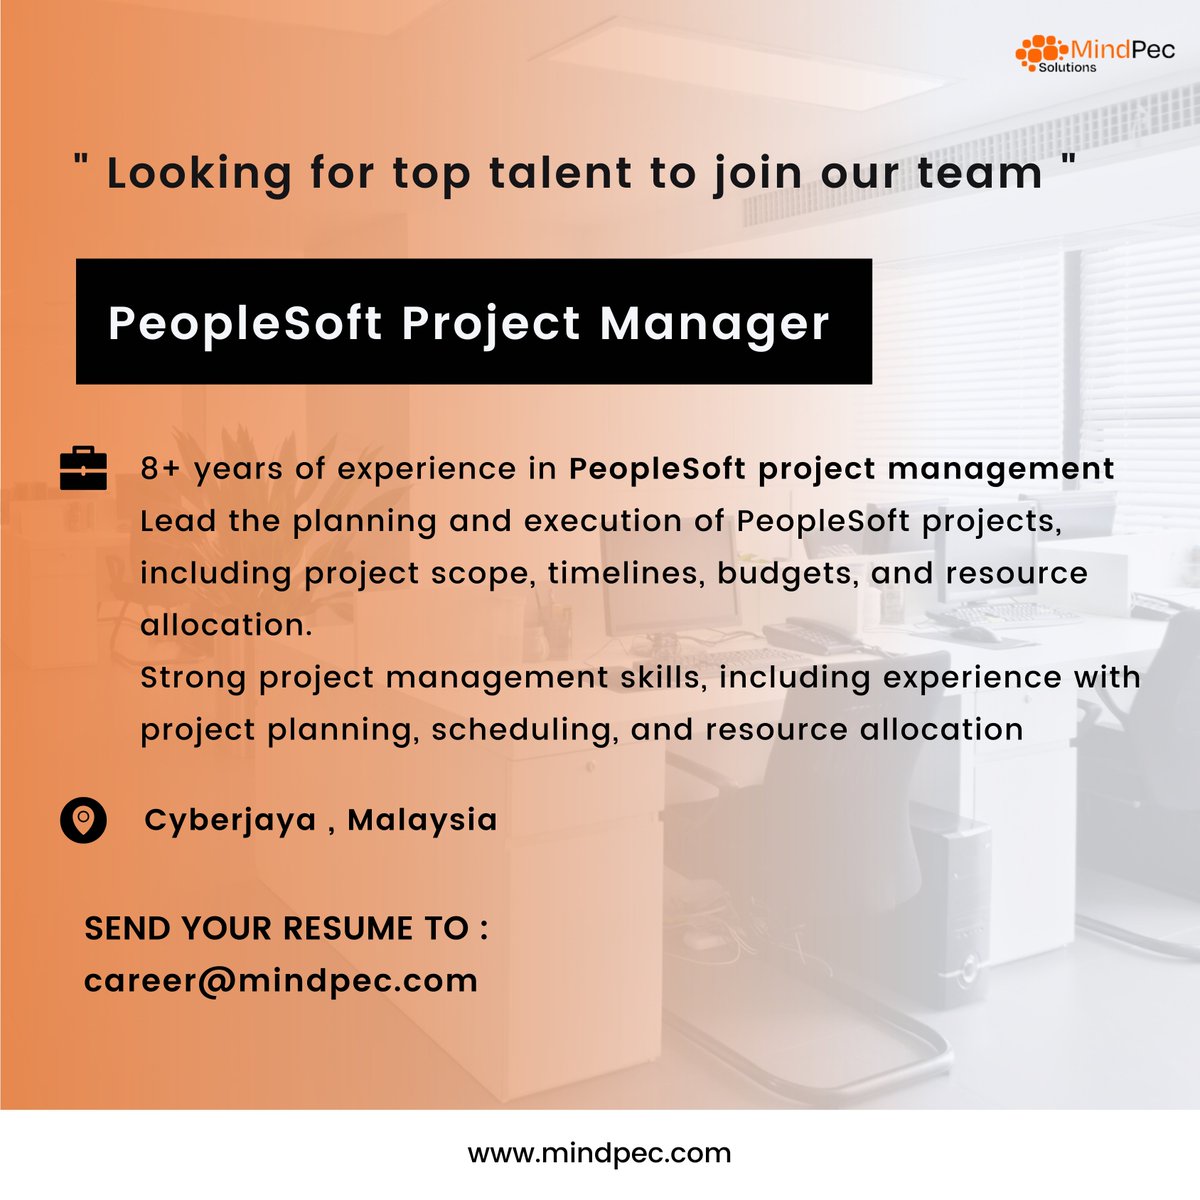 #PeopleSoft #Project #Manager :

Job Location : #CyberJaya , #Malaysia
8+ years of experience in PeopleSoft project management

#hiring #peoplesoft #projectmanagement #projectmanagerjobs #malaysiajobs #malaysian